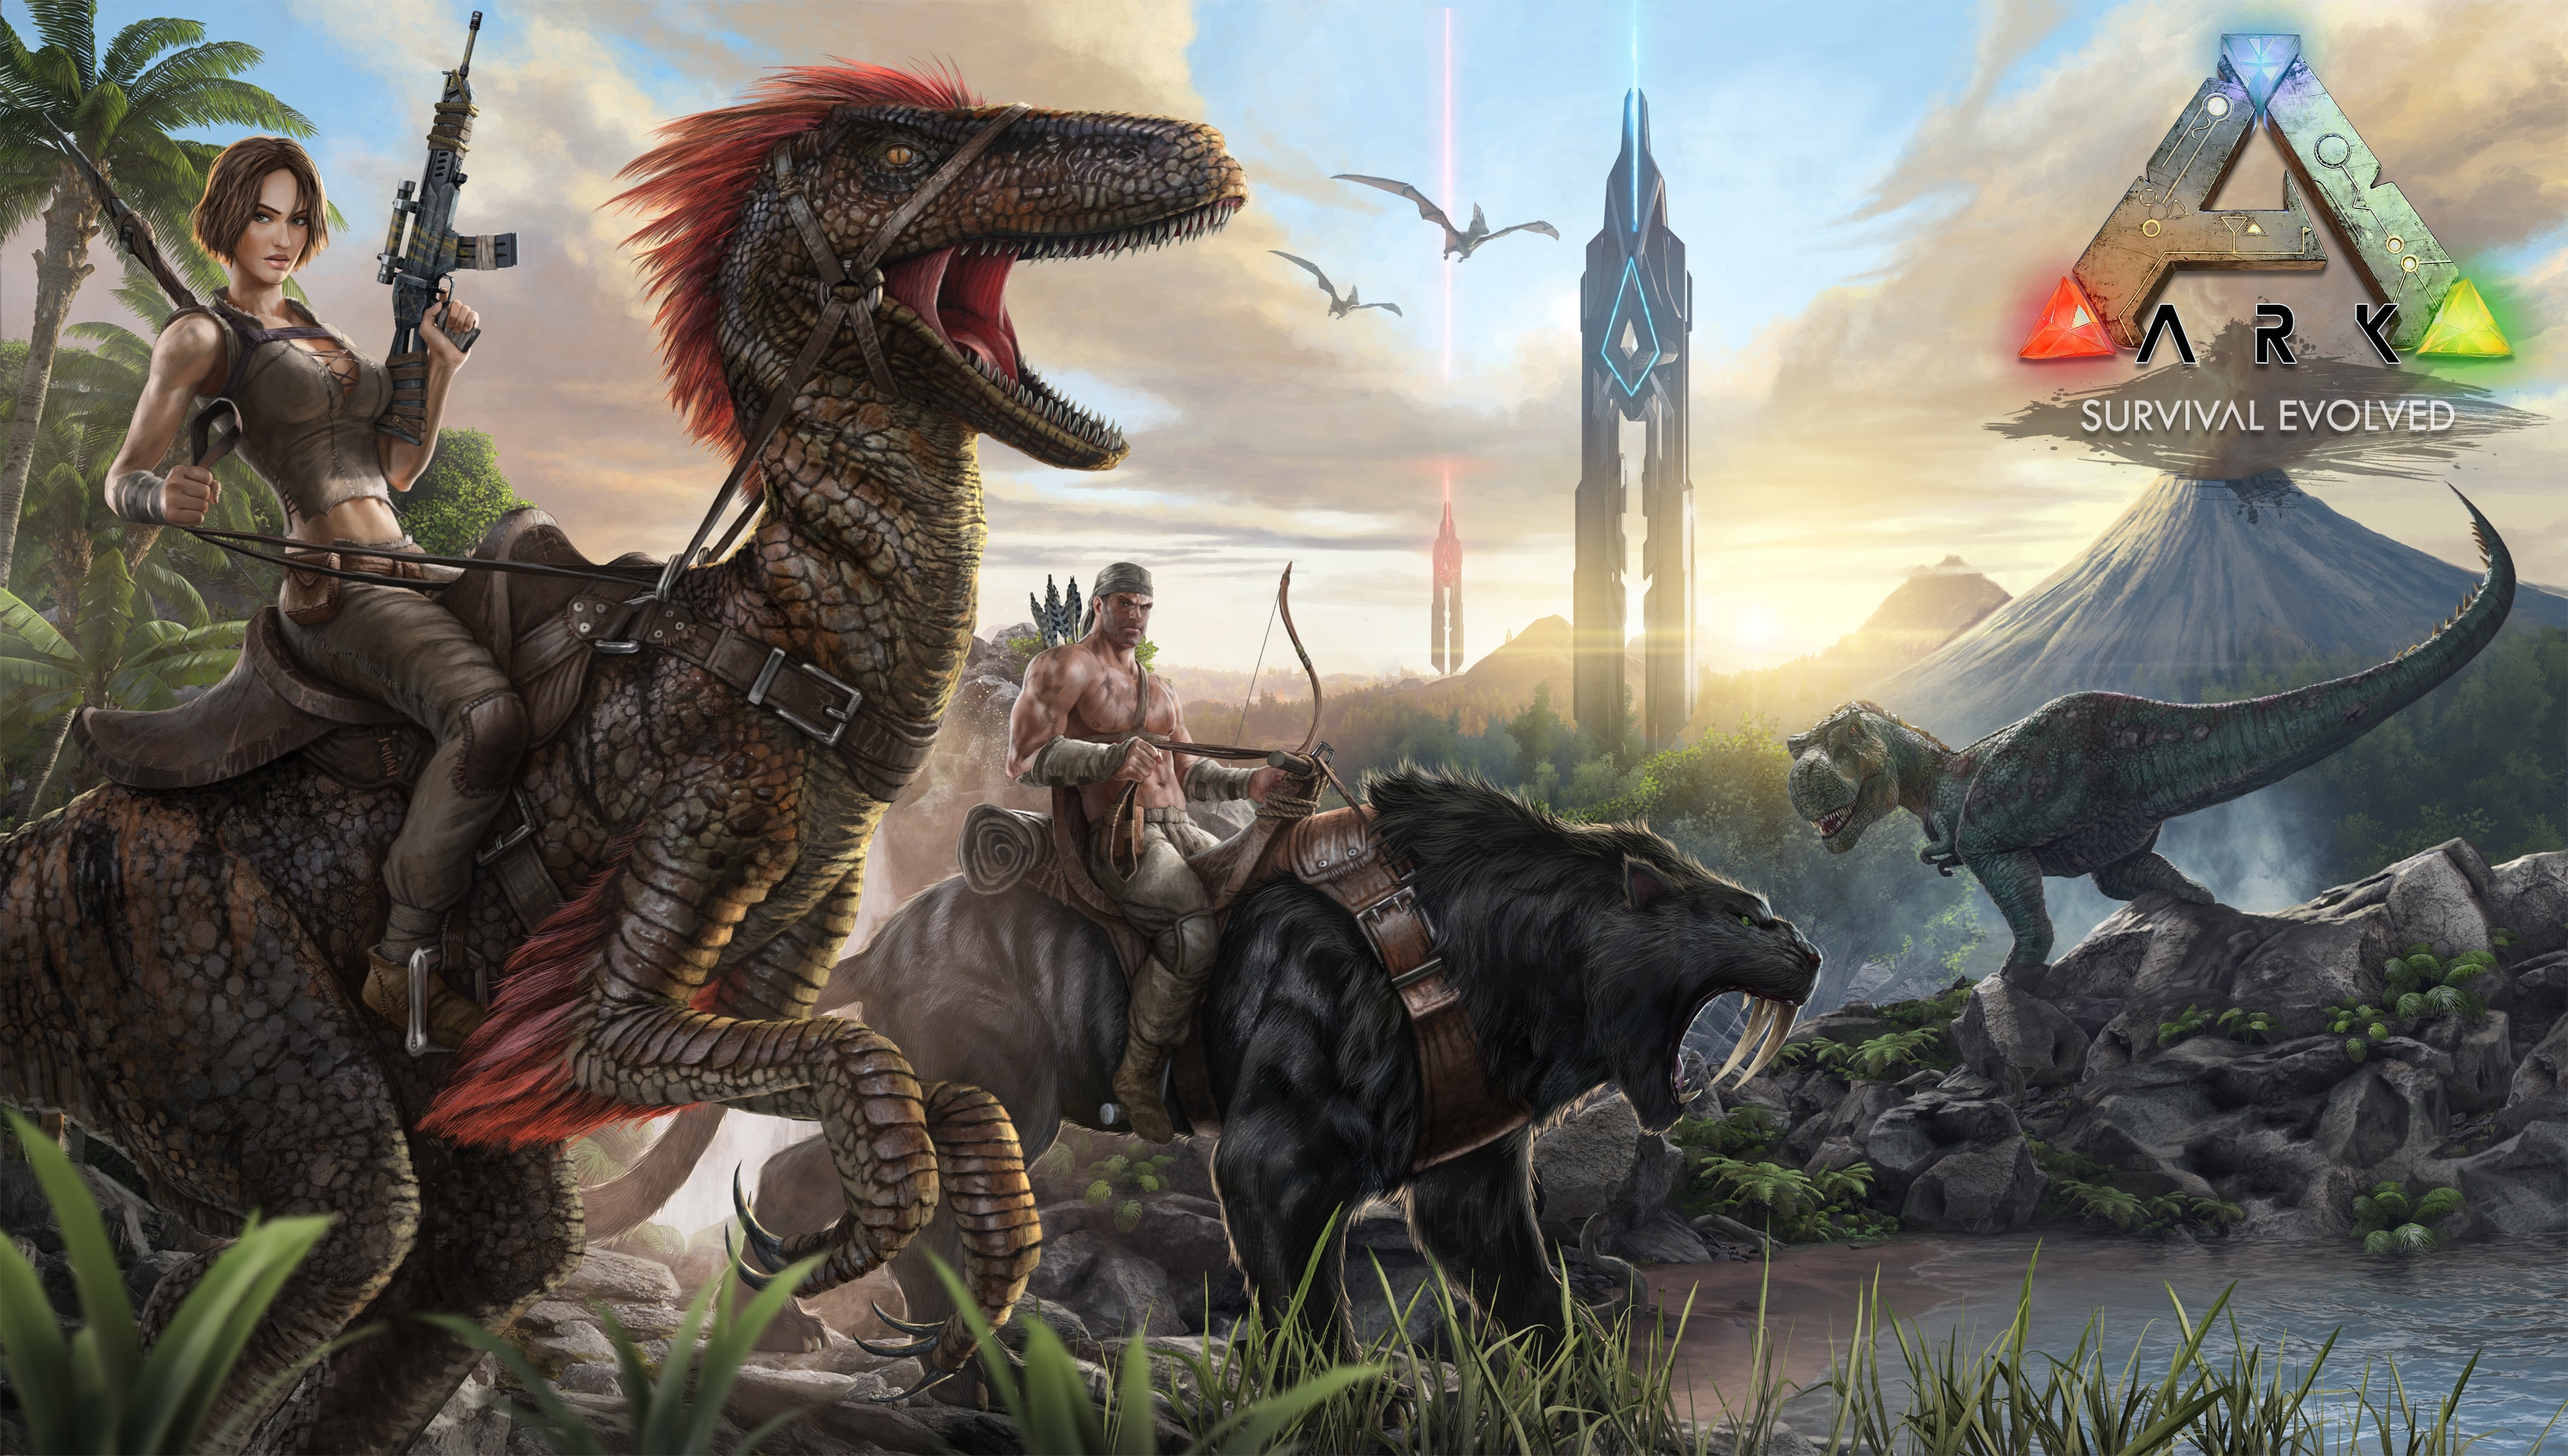 ARK: Survival Evolved Scorched Earth expansion available today